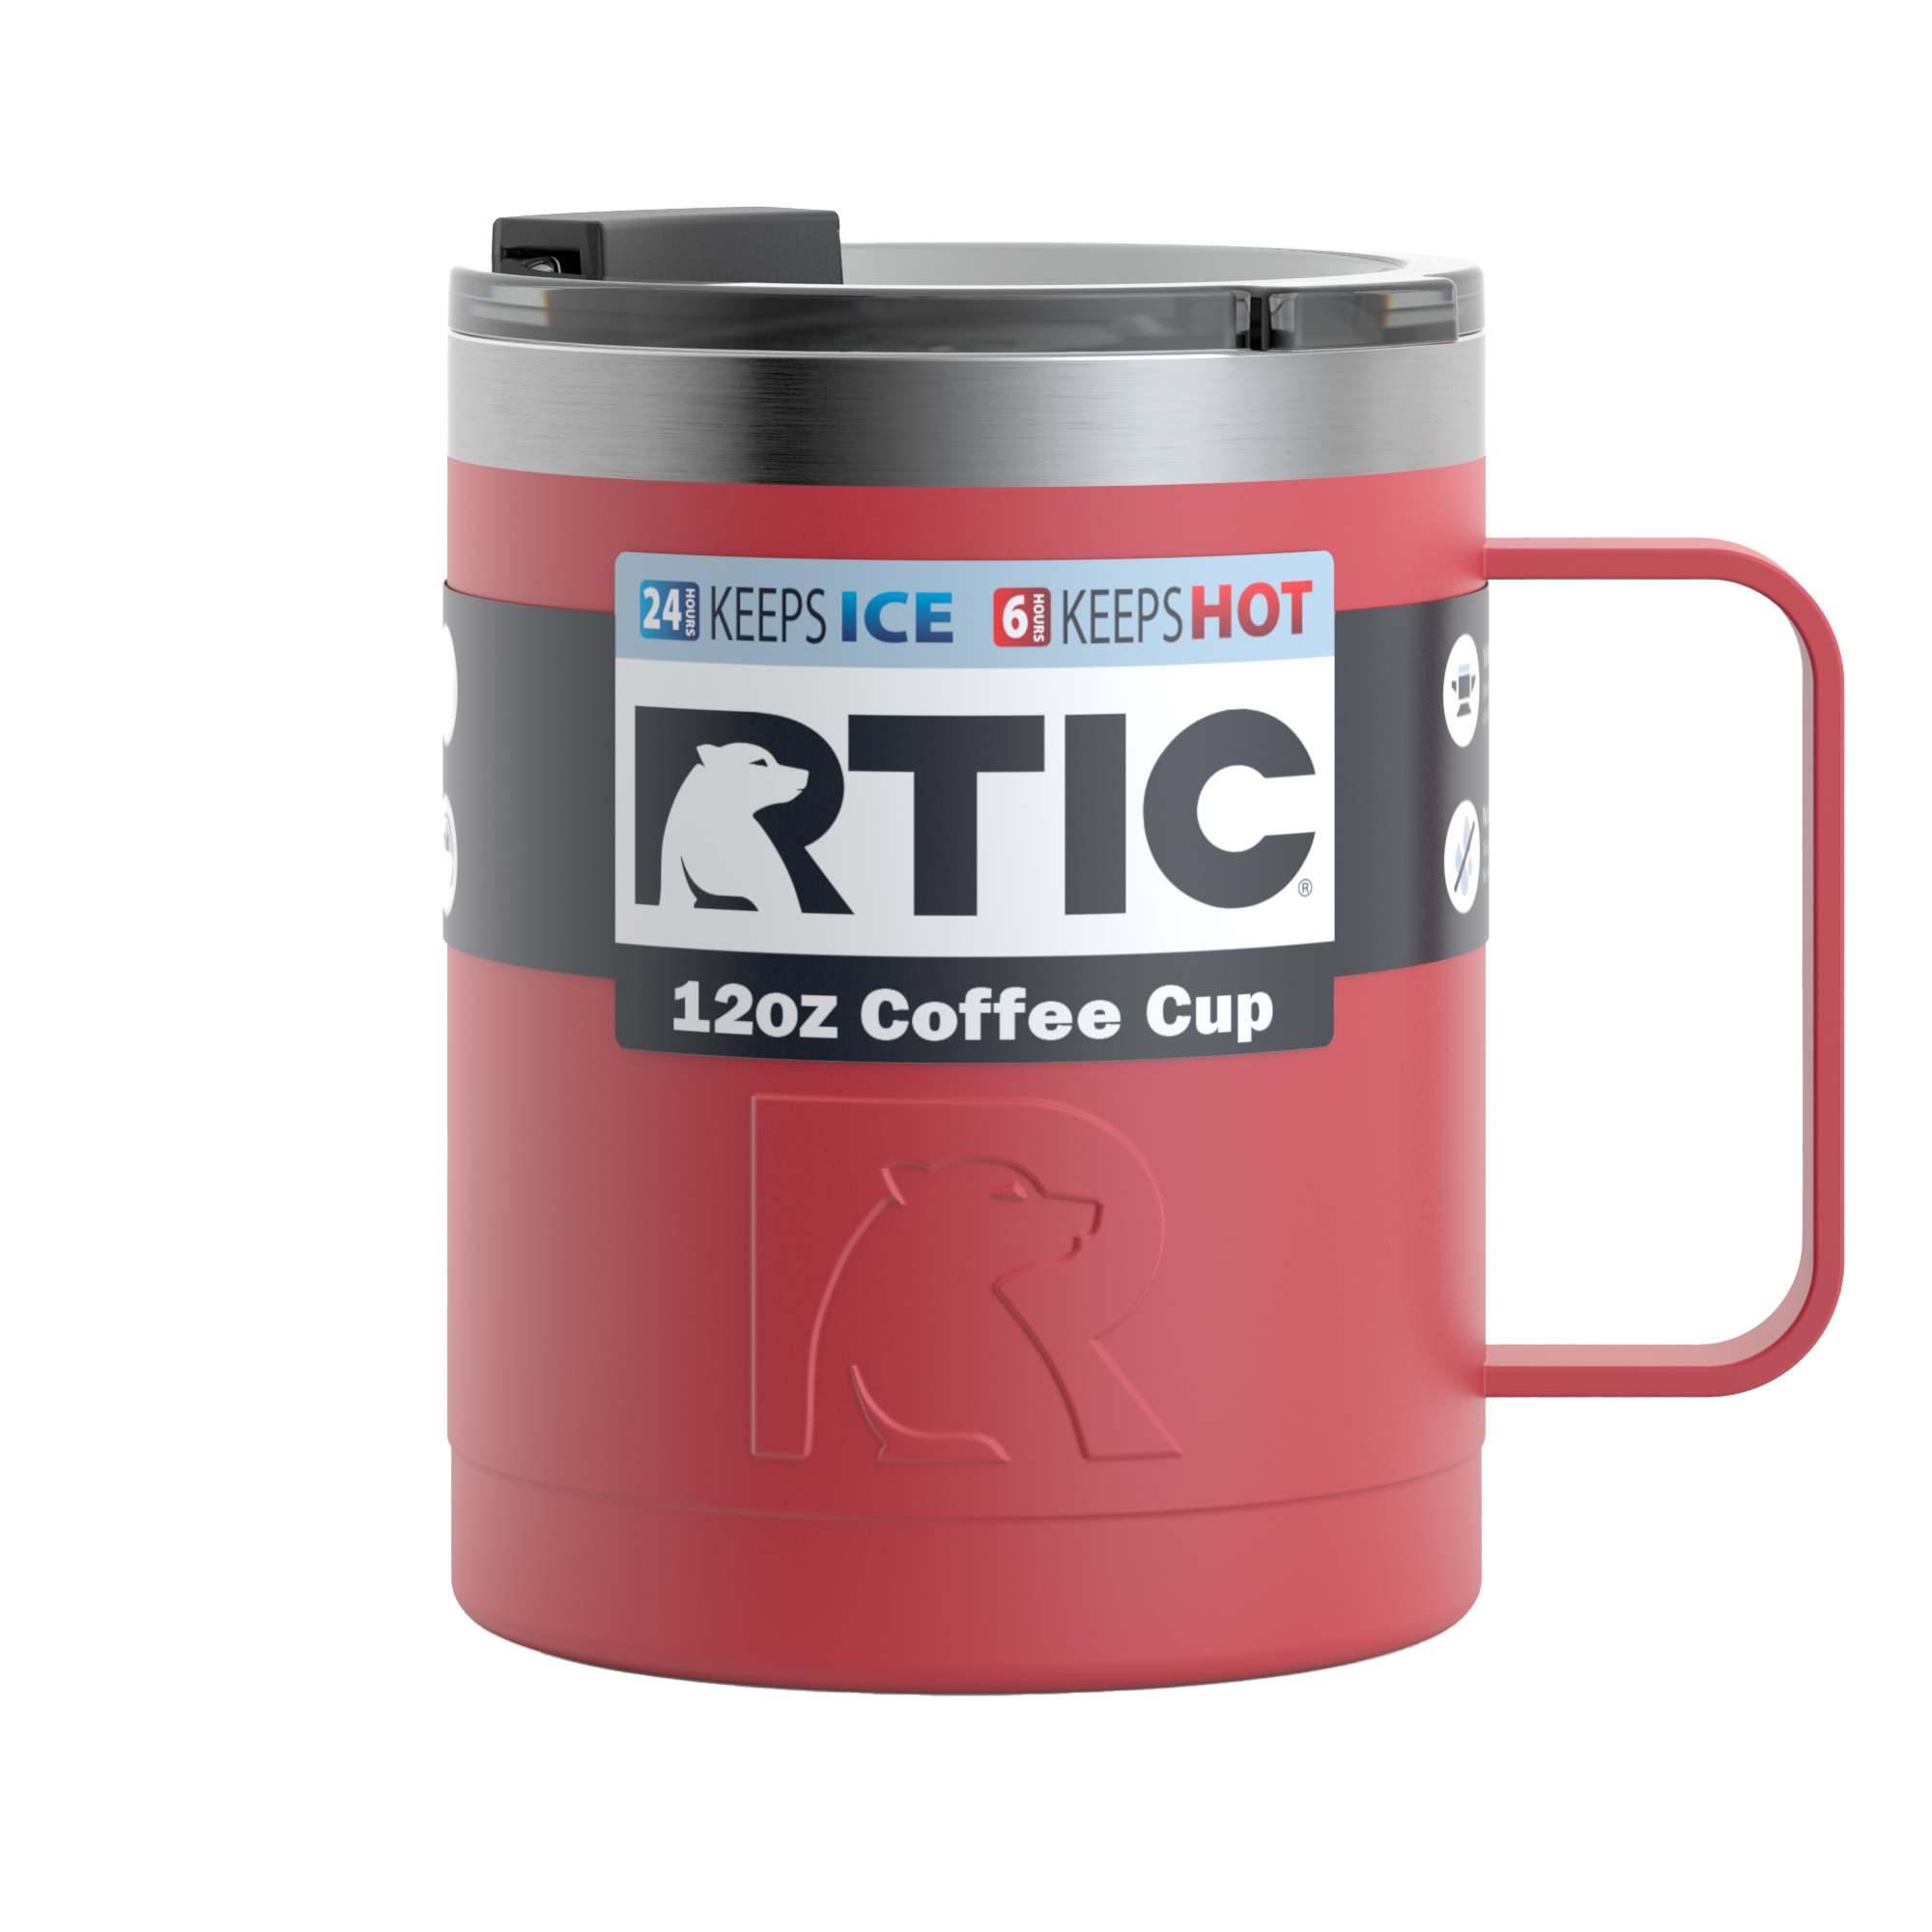 RTIC Outdoors 20-fl oz Stainless Steel Insulated Travel Mug | 19220